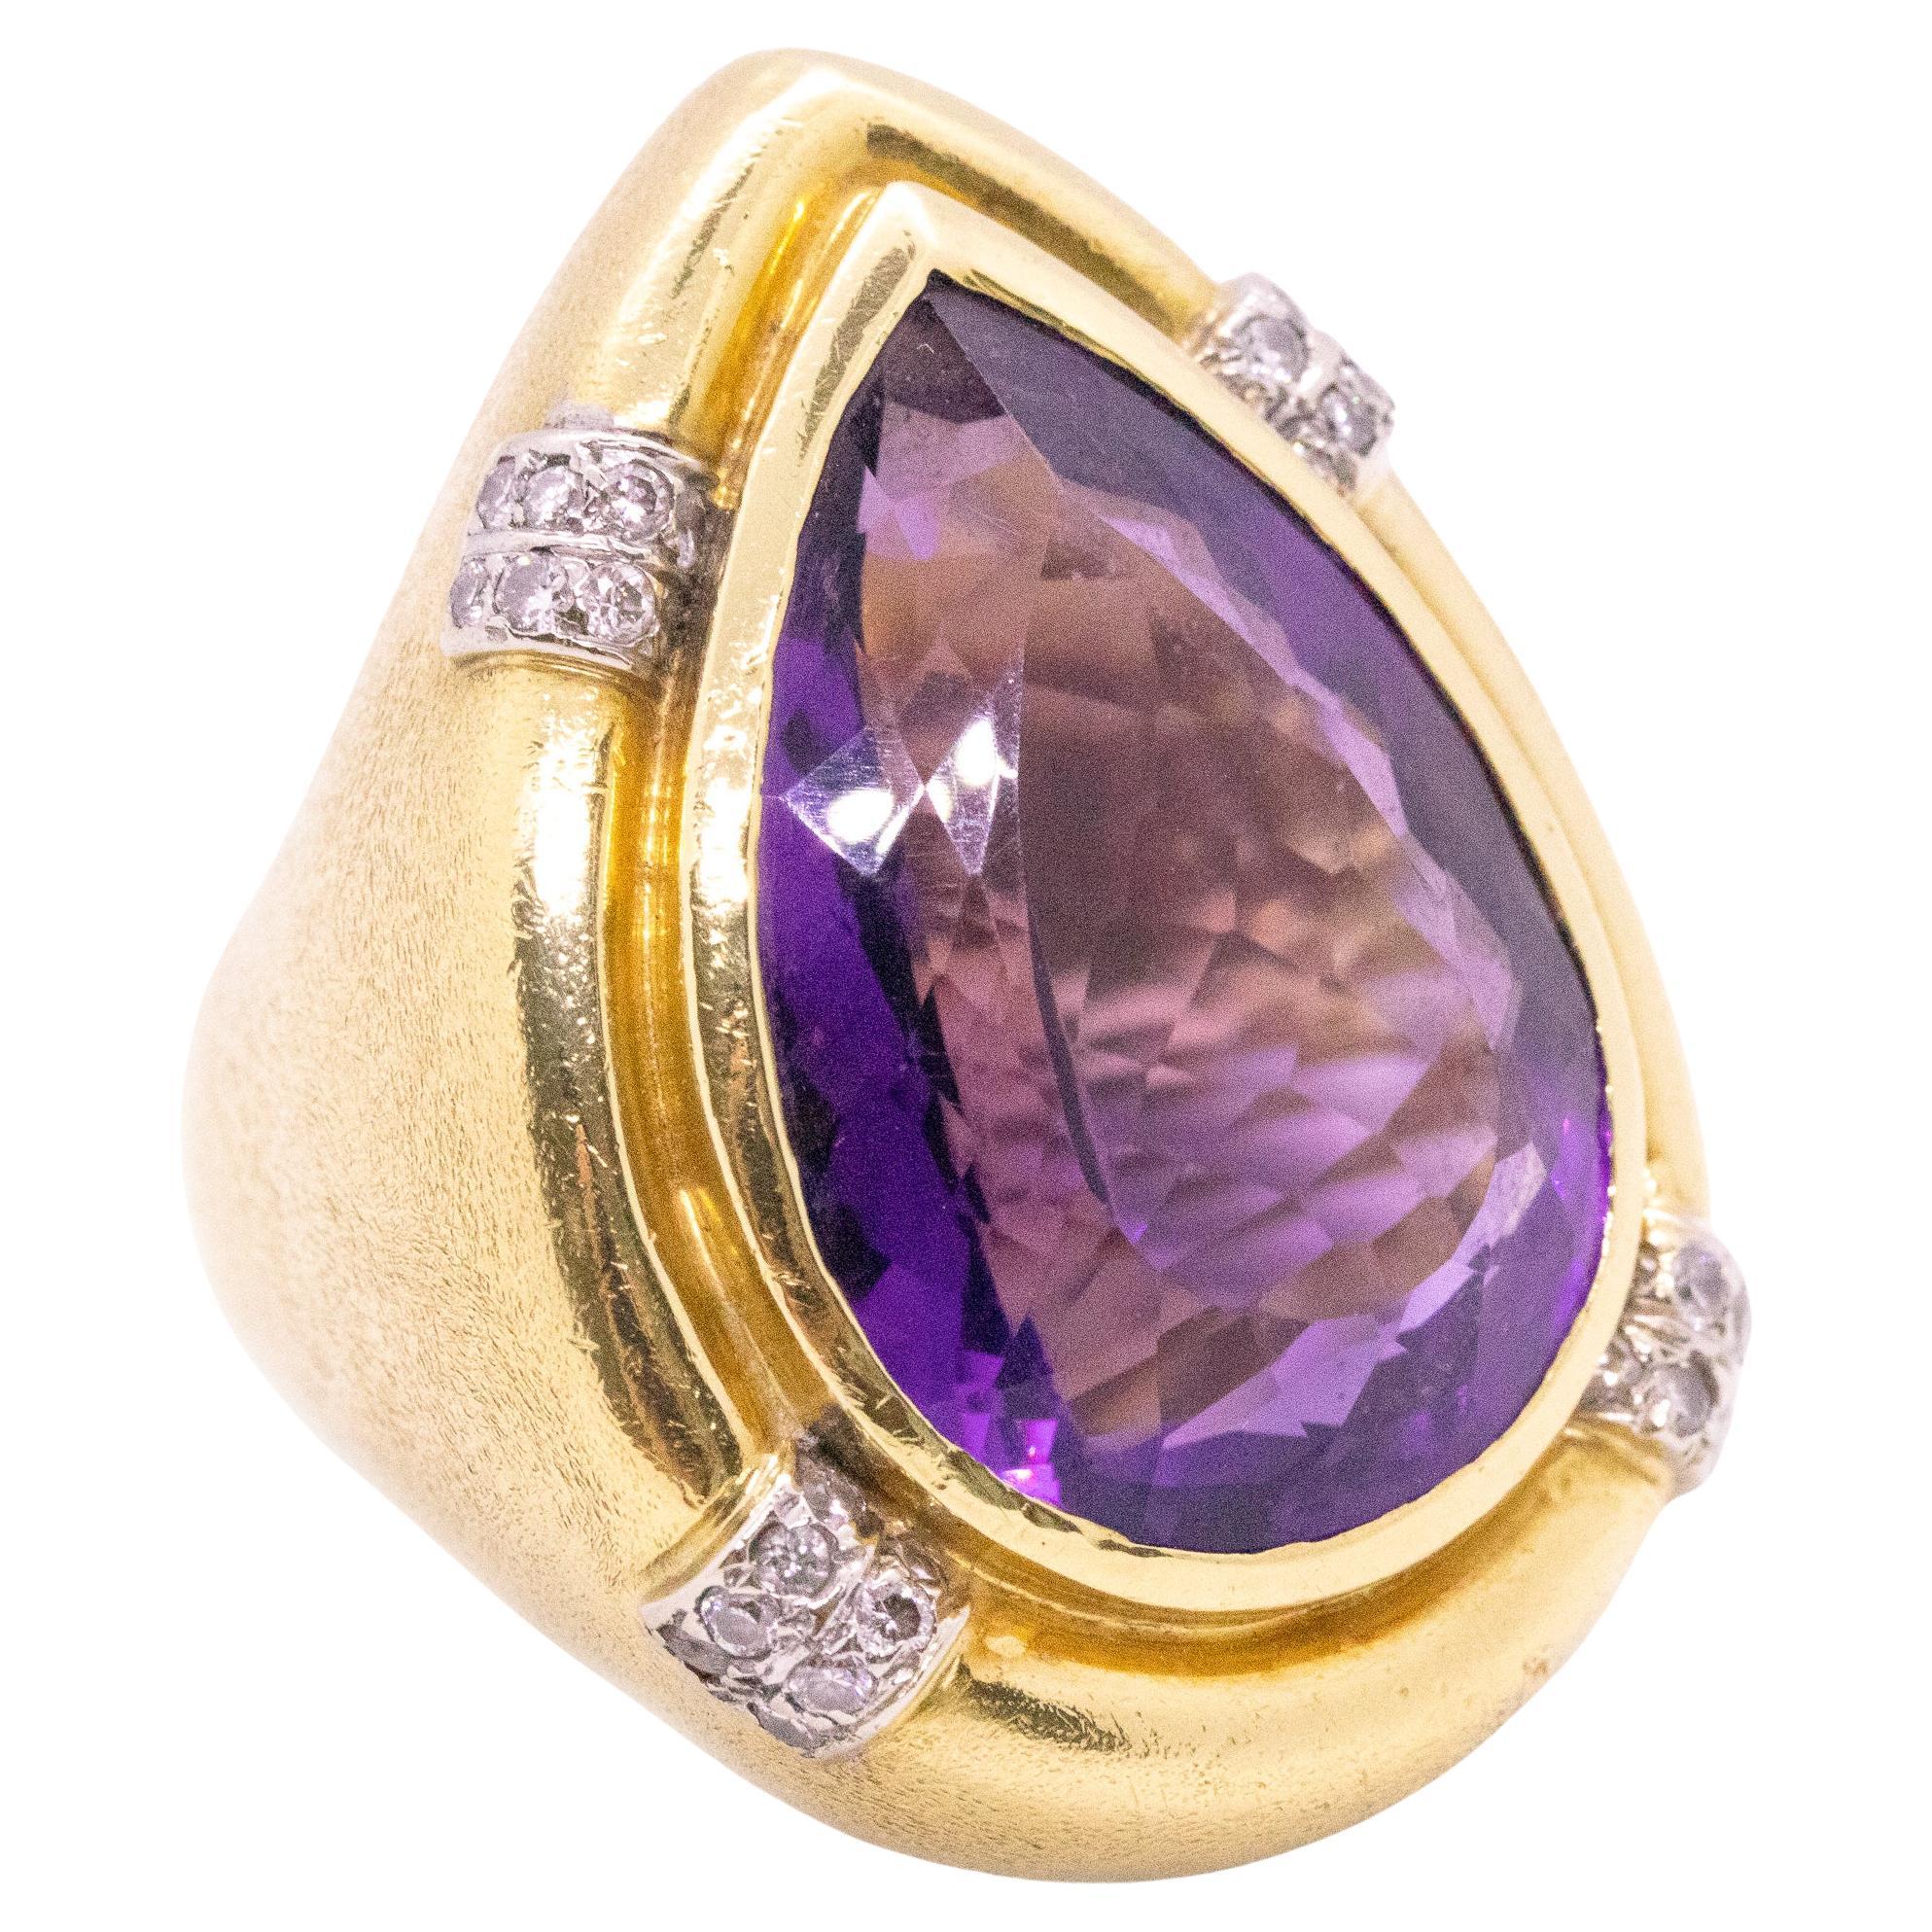 Retro 1970 Oversized Cocktail Ring 18Kt Gold 31.77 Cts in Diamonds and Amethyst